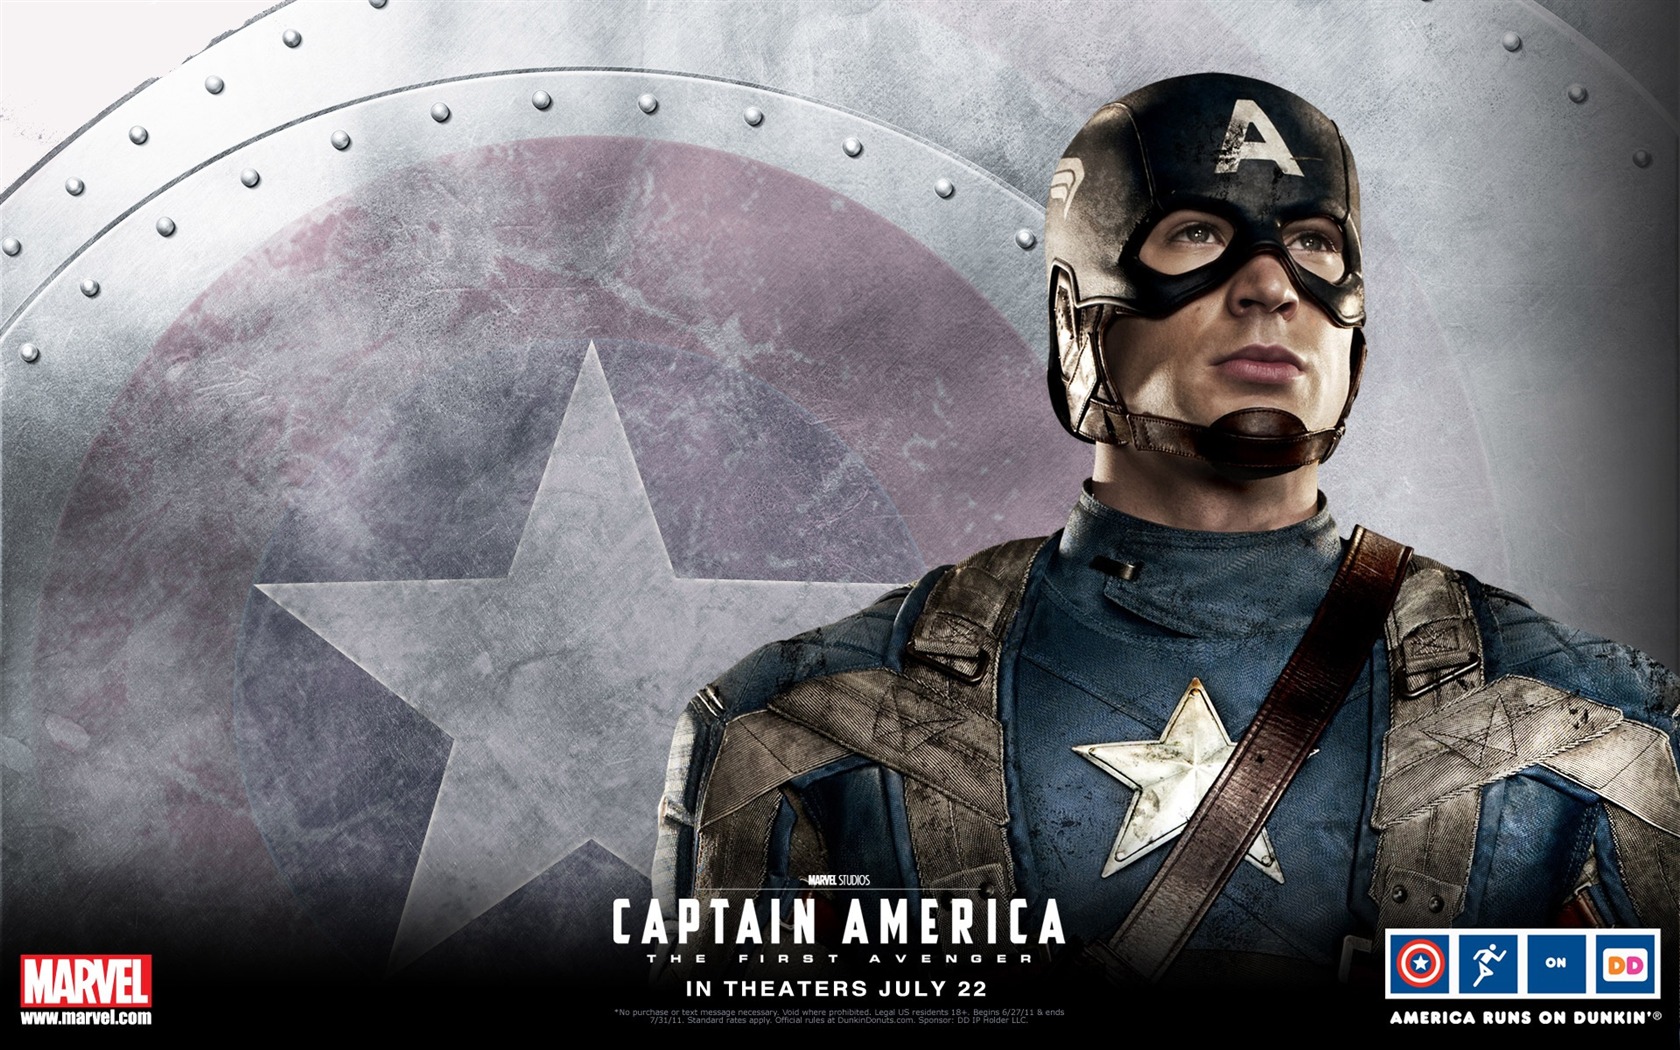 Captain America: The First Avenger wallpapers HD #5 - 1680x1050